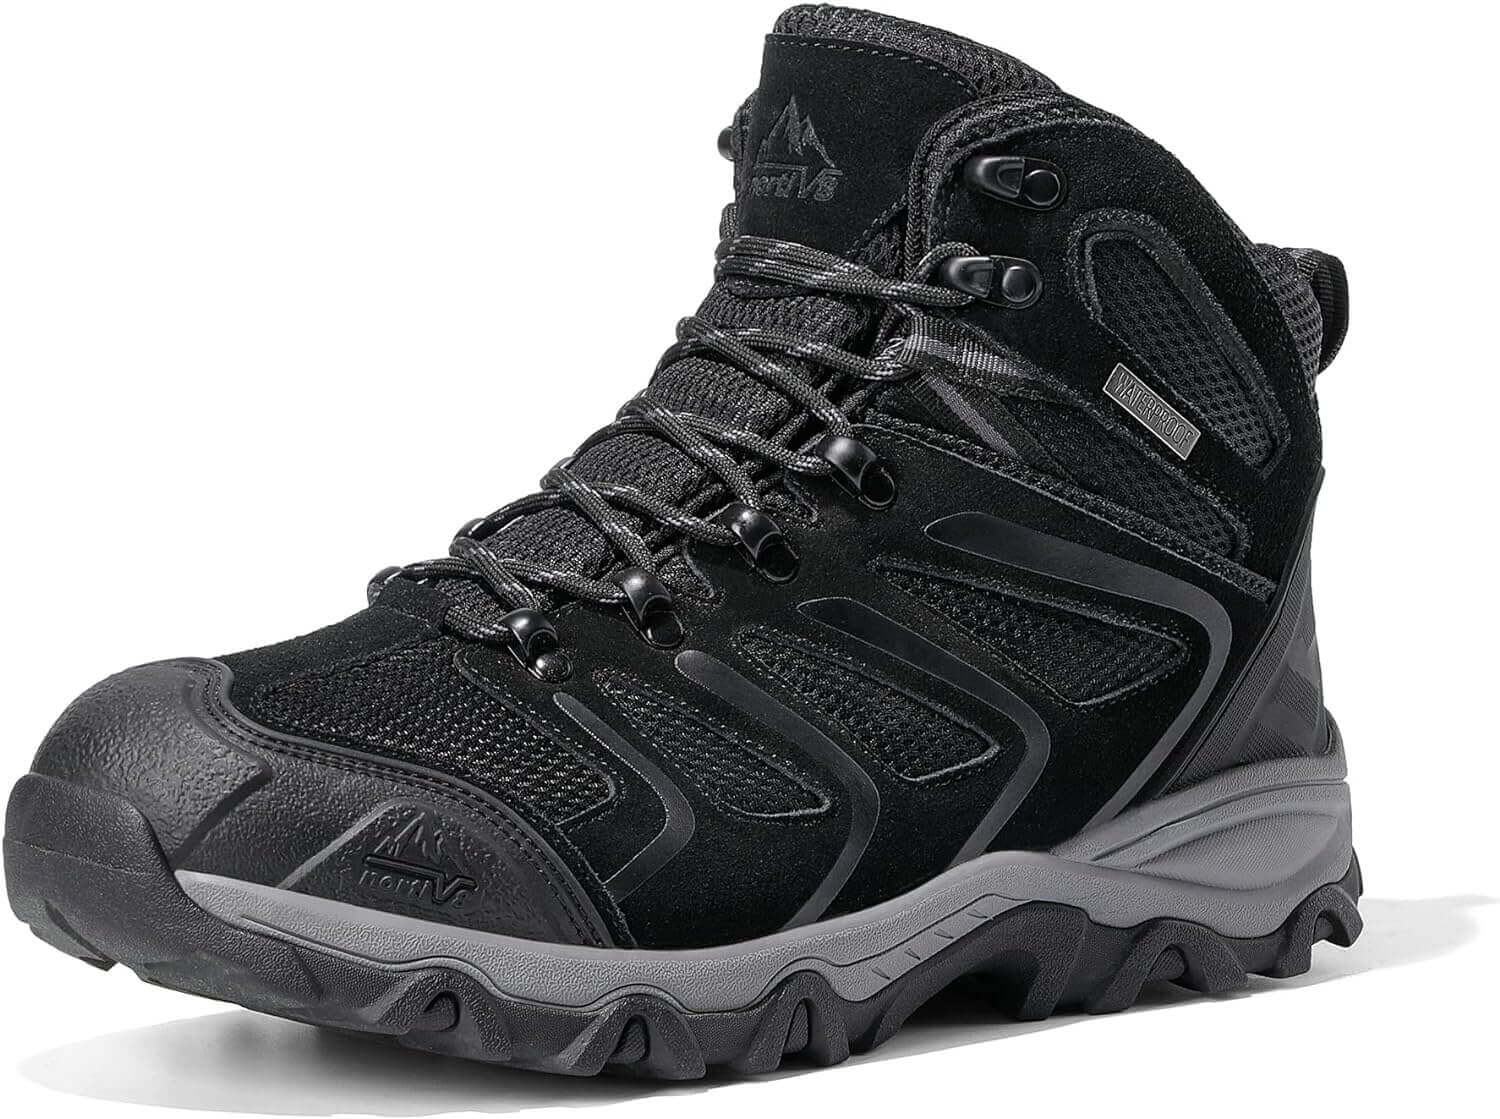 Shop The Latest >NORTIV 8 Men's Ankle High Waterproof Hiking Boots > *Only $69.99*> From The Top Brand > *NORTIV 8l* > Shop Now and Get Free Shipping On Orders Over $45.00 >*Shop Earth Foot*